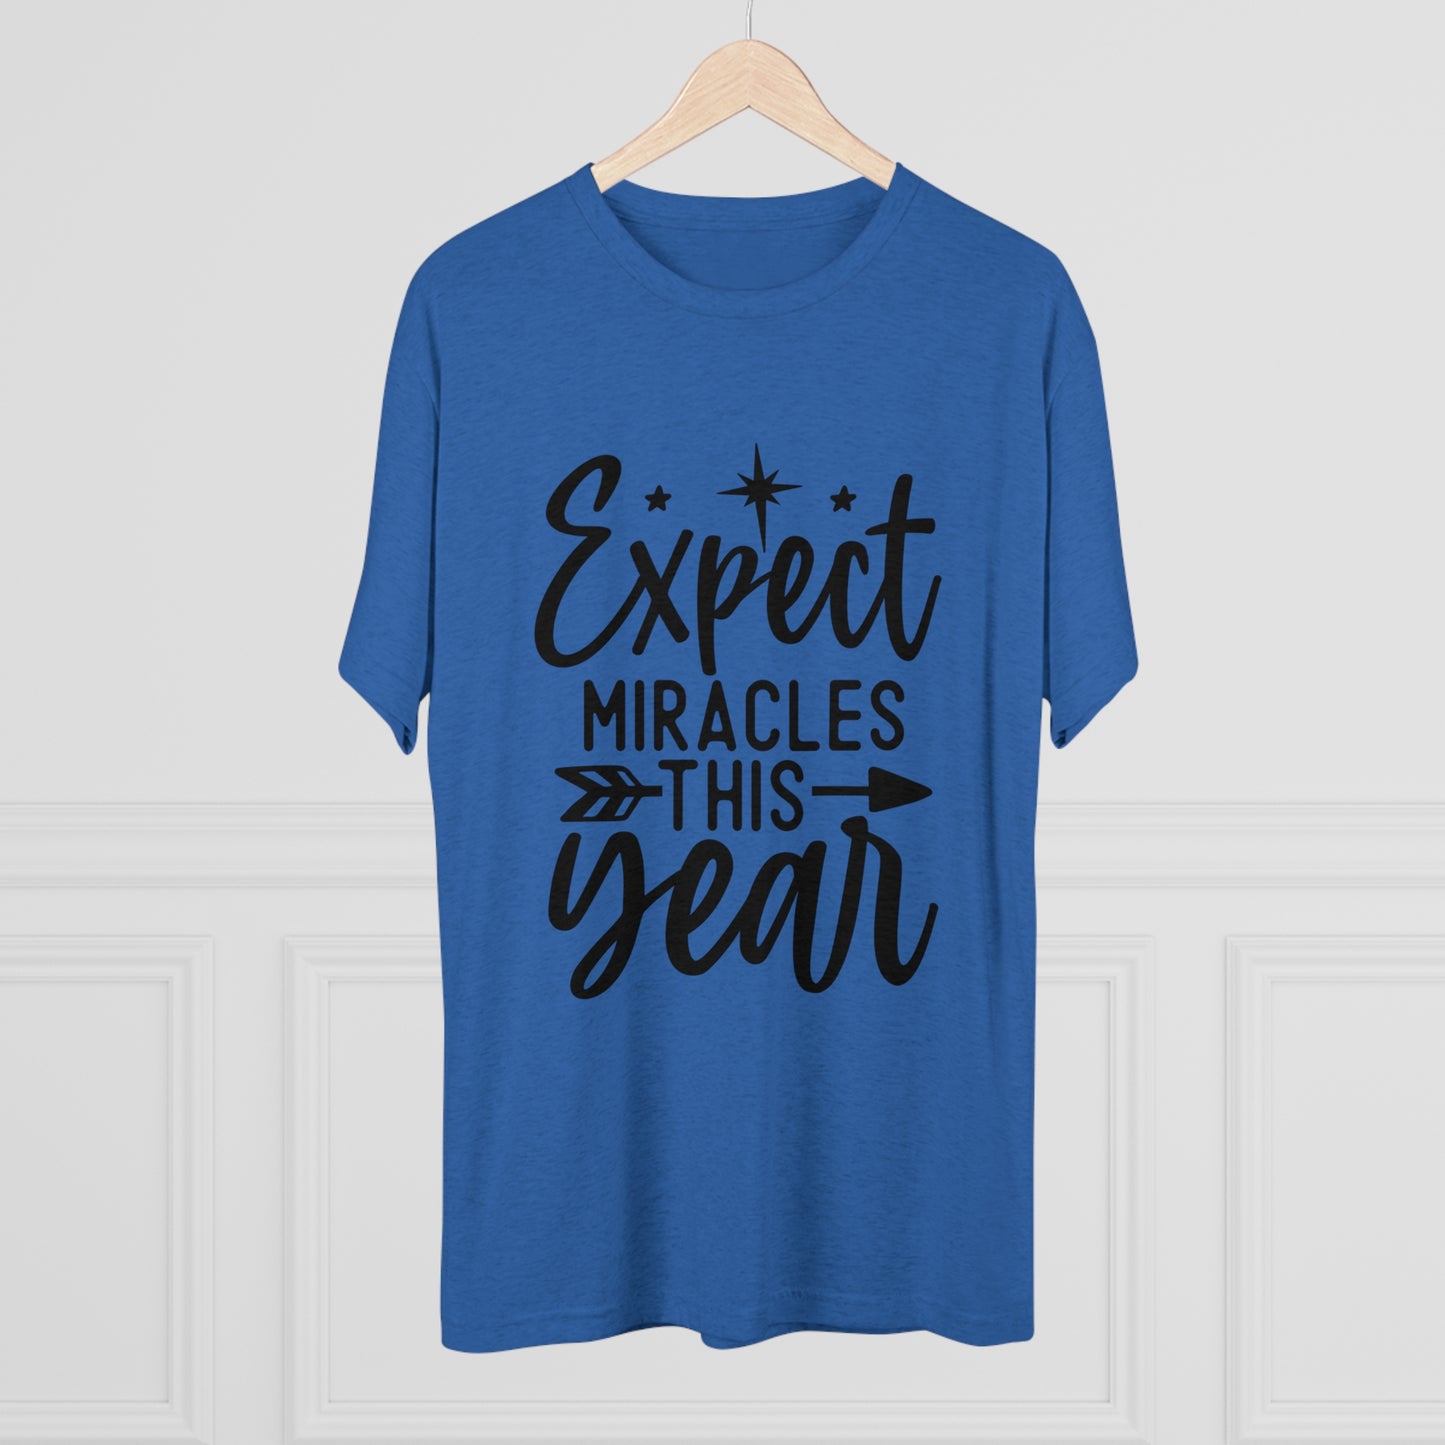 Expect Miracles Unisex Tri-Blend Crew Tee